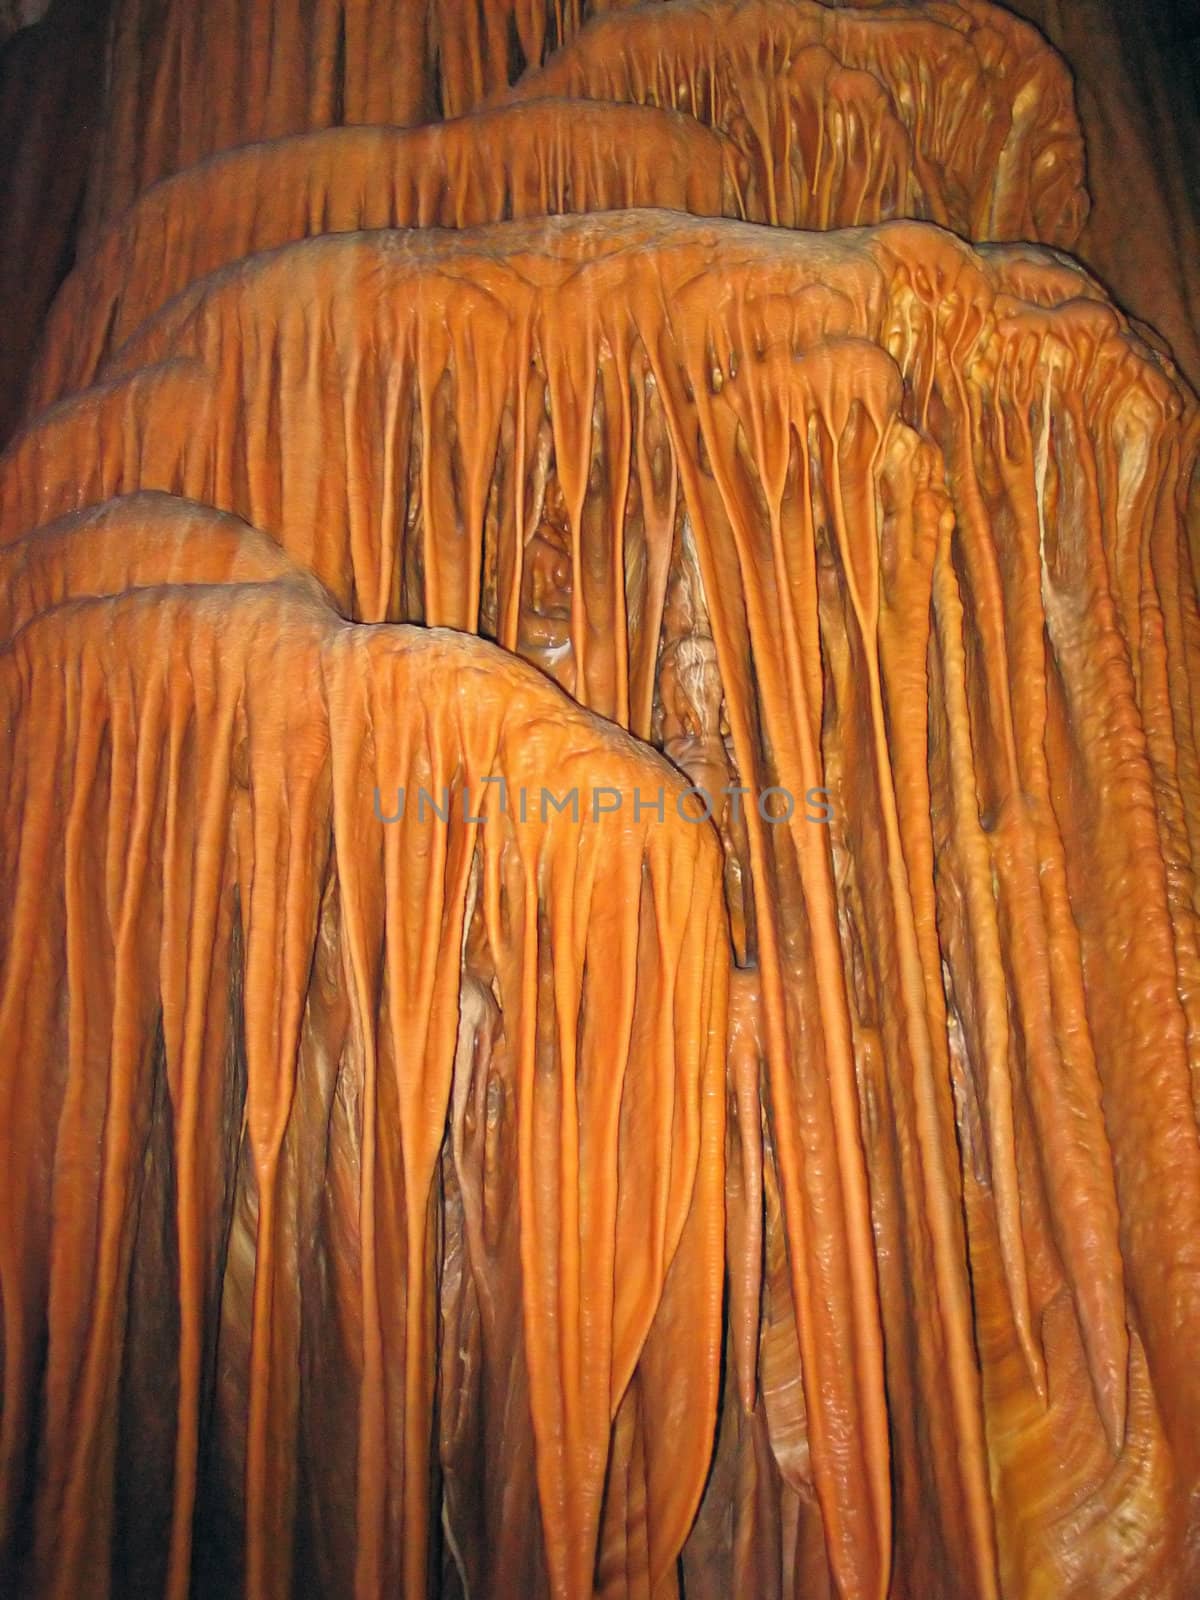 Details of Stalactites and stalagmite cave